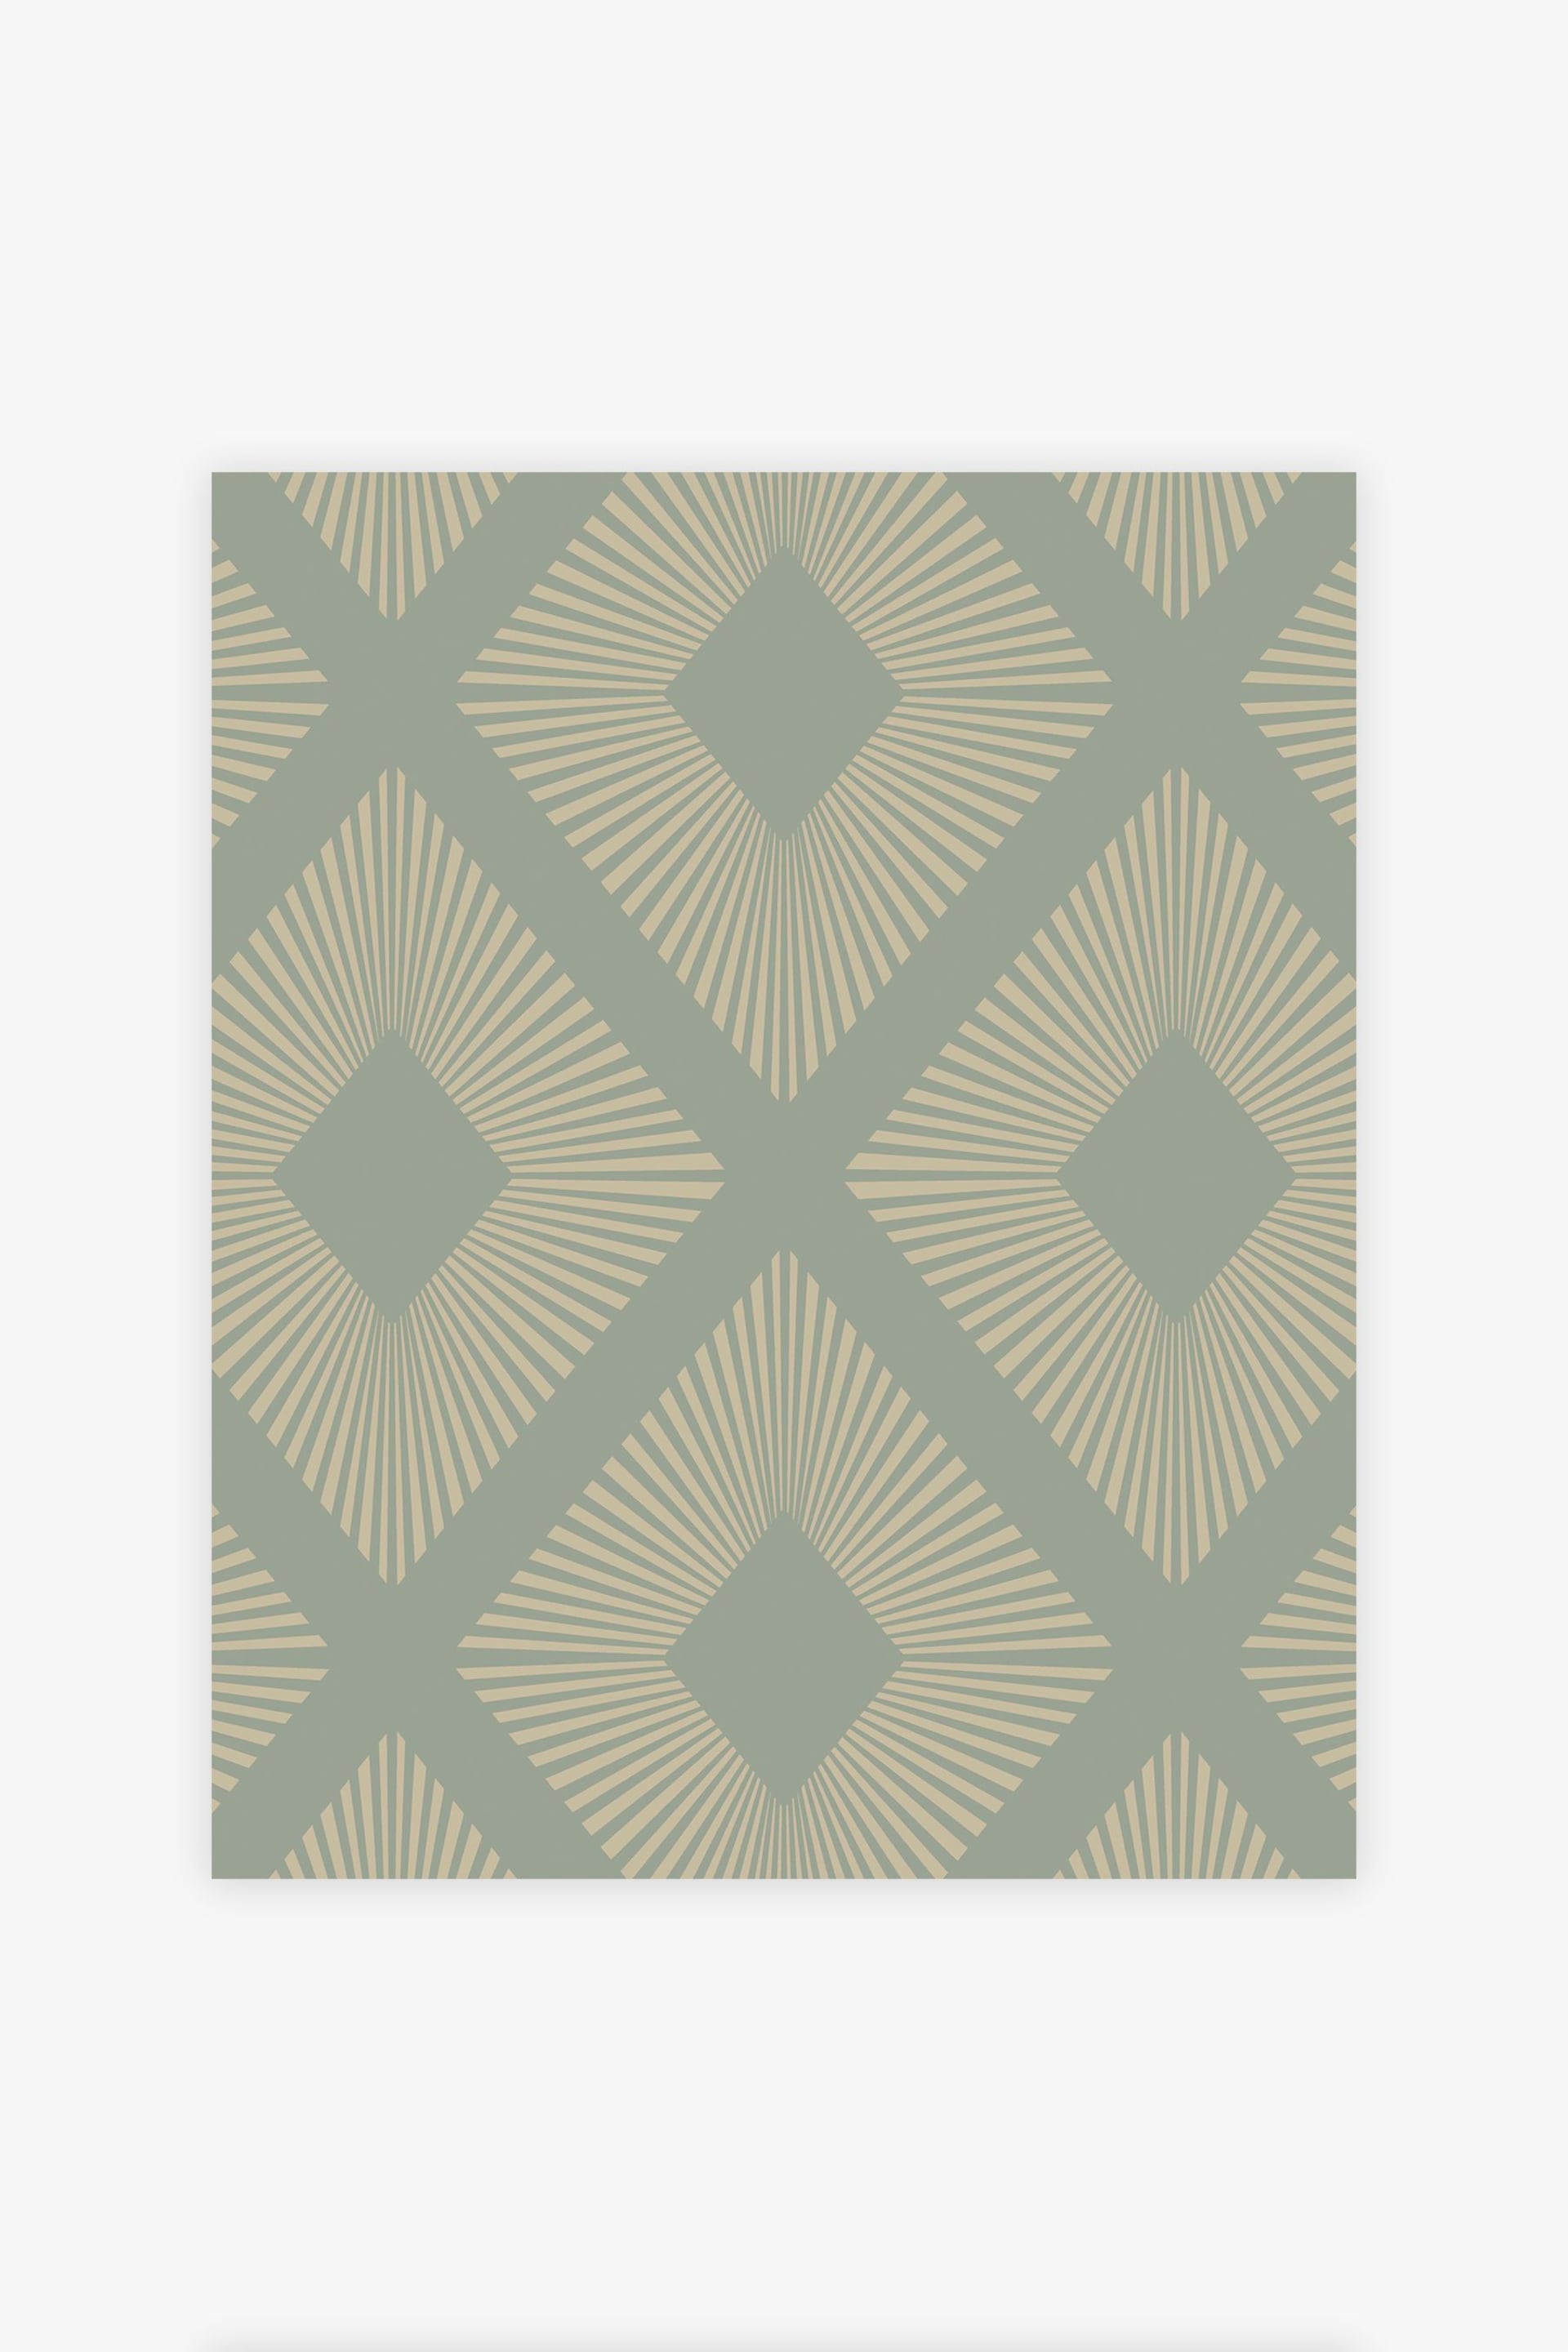 Sage Green Deco Triangle Wallpaper - Image 3 of 4